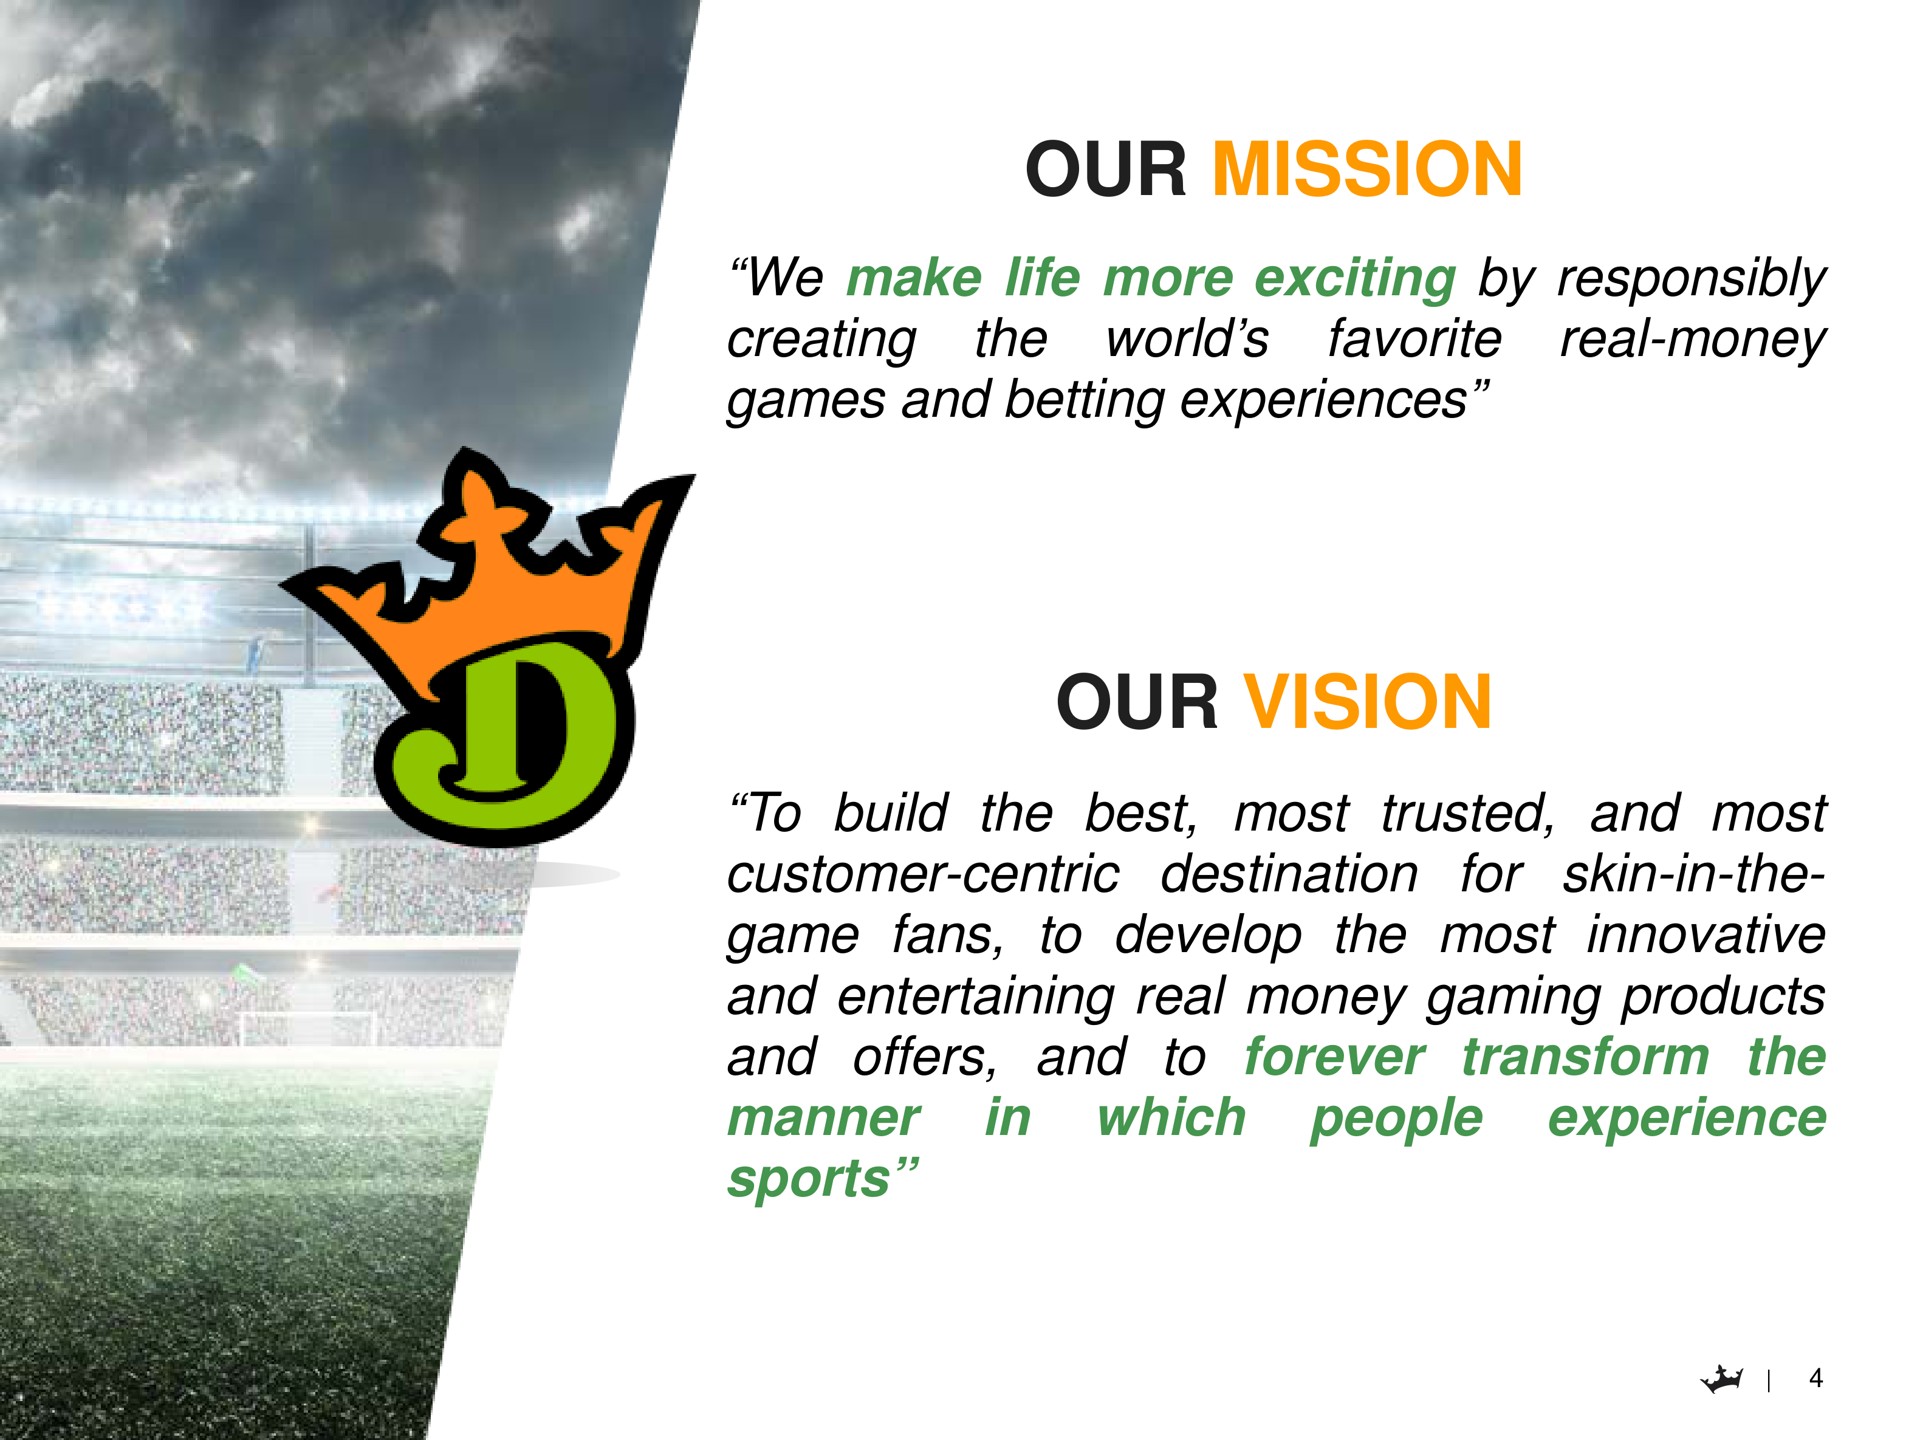 our mission we make life more exciting by responsibly creating real money favorite the world games and betting experiences our vision to build the best most trusted and most customer centric destination for skin in the game fans to develop the most innovative and entertaining real money gaming products and offers and to forever transform the in which people experience manner sports as a | DraftKings